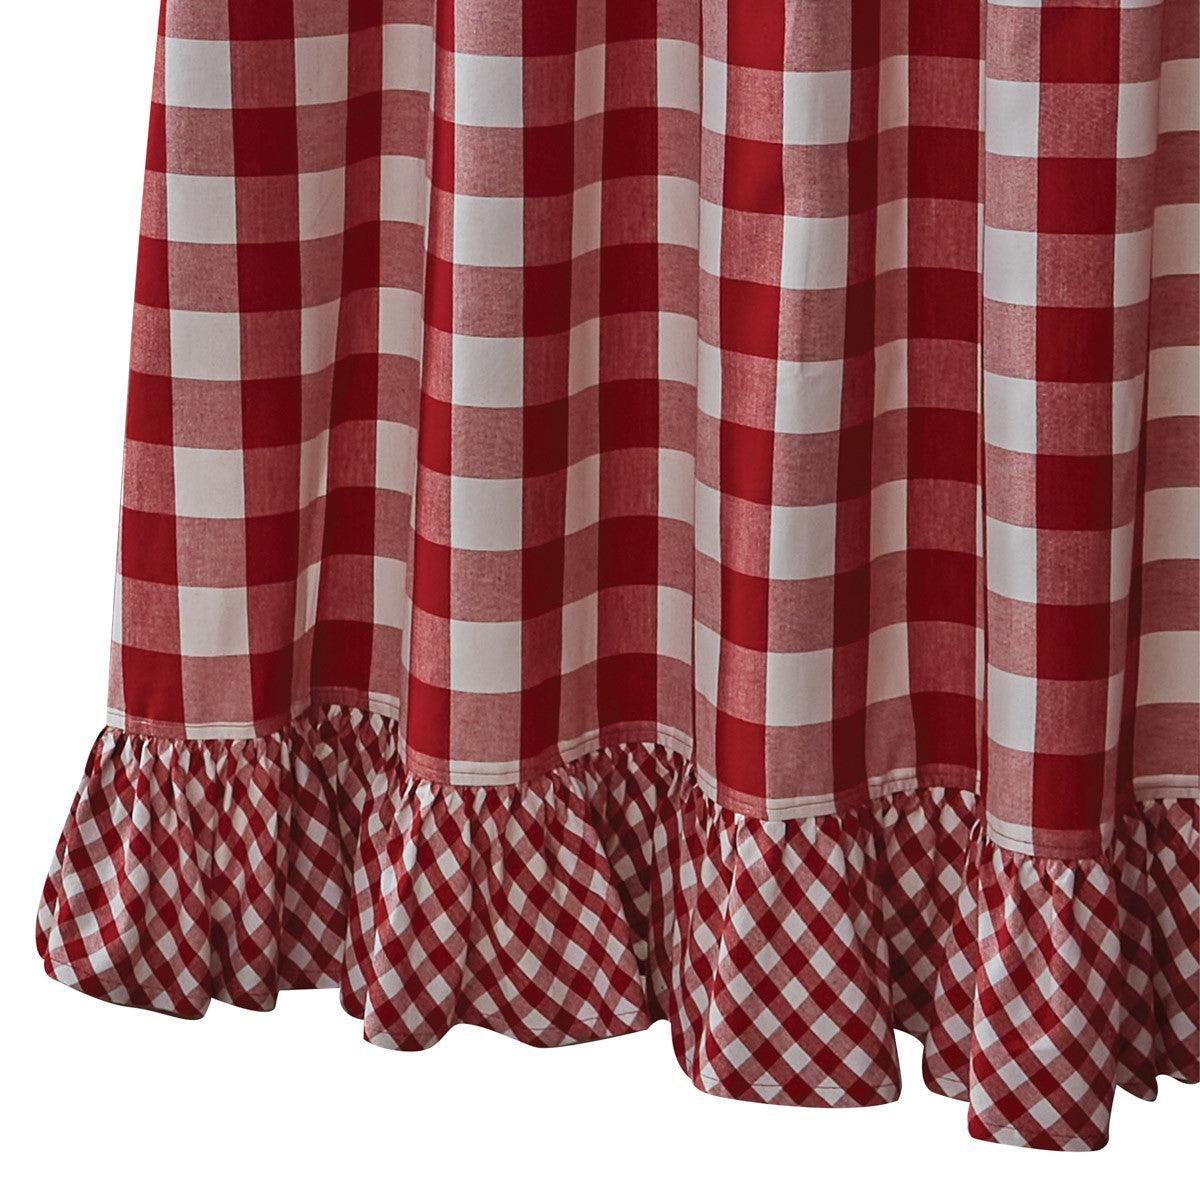 Wicklow Ruffled Shower Curtain 72" X 72" - Red Park Designs - The Fox Decor